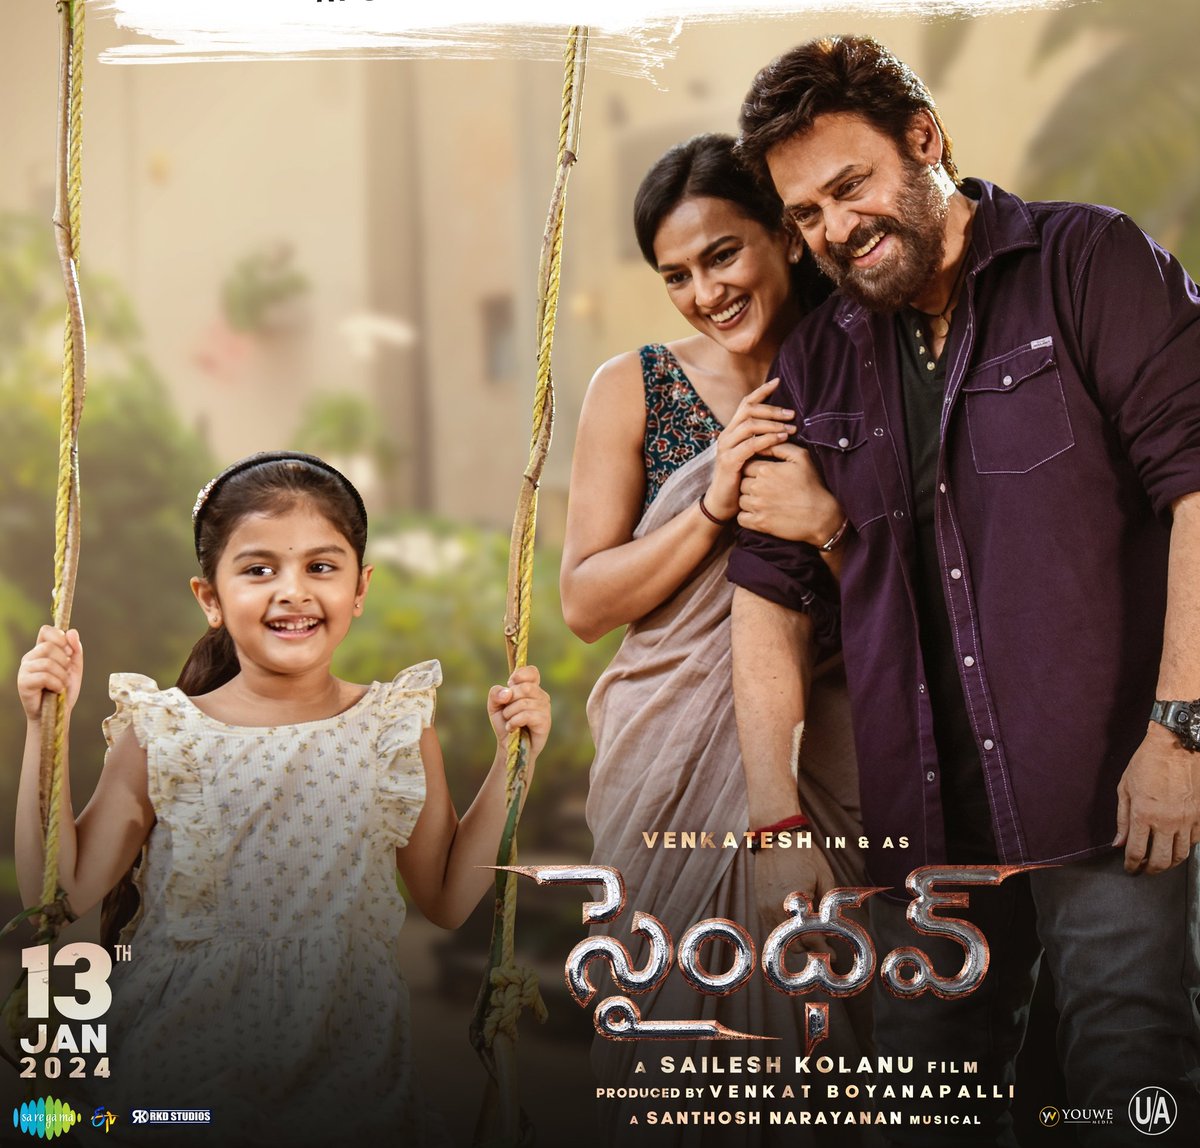 #Saindhav is Venkatesh's One man Show with a good story and narration.
#SaindhavReview: 3.75/5